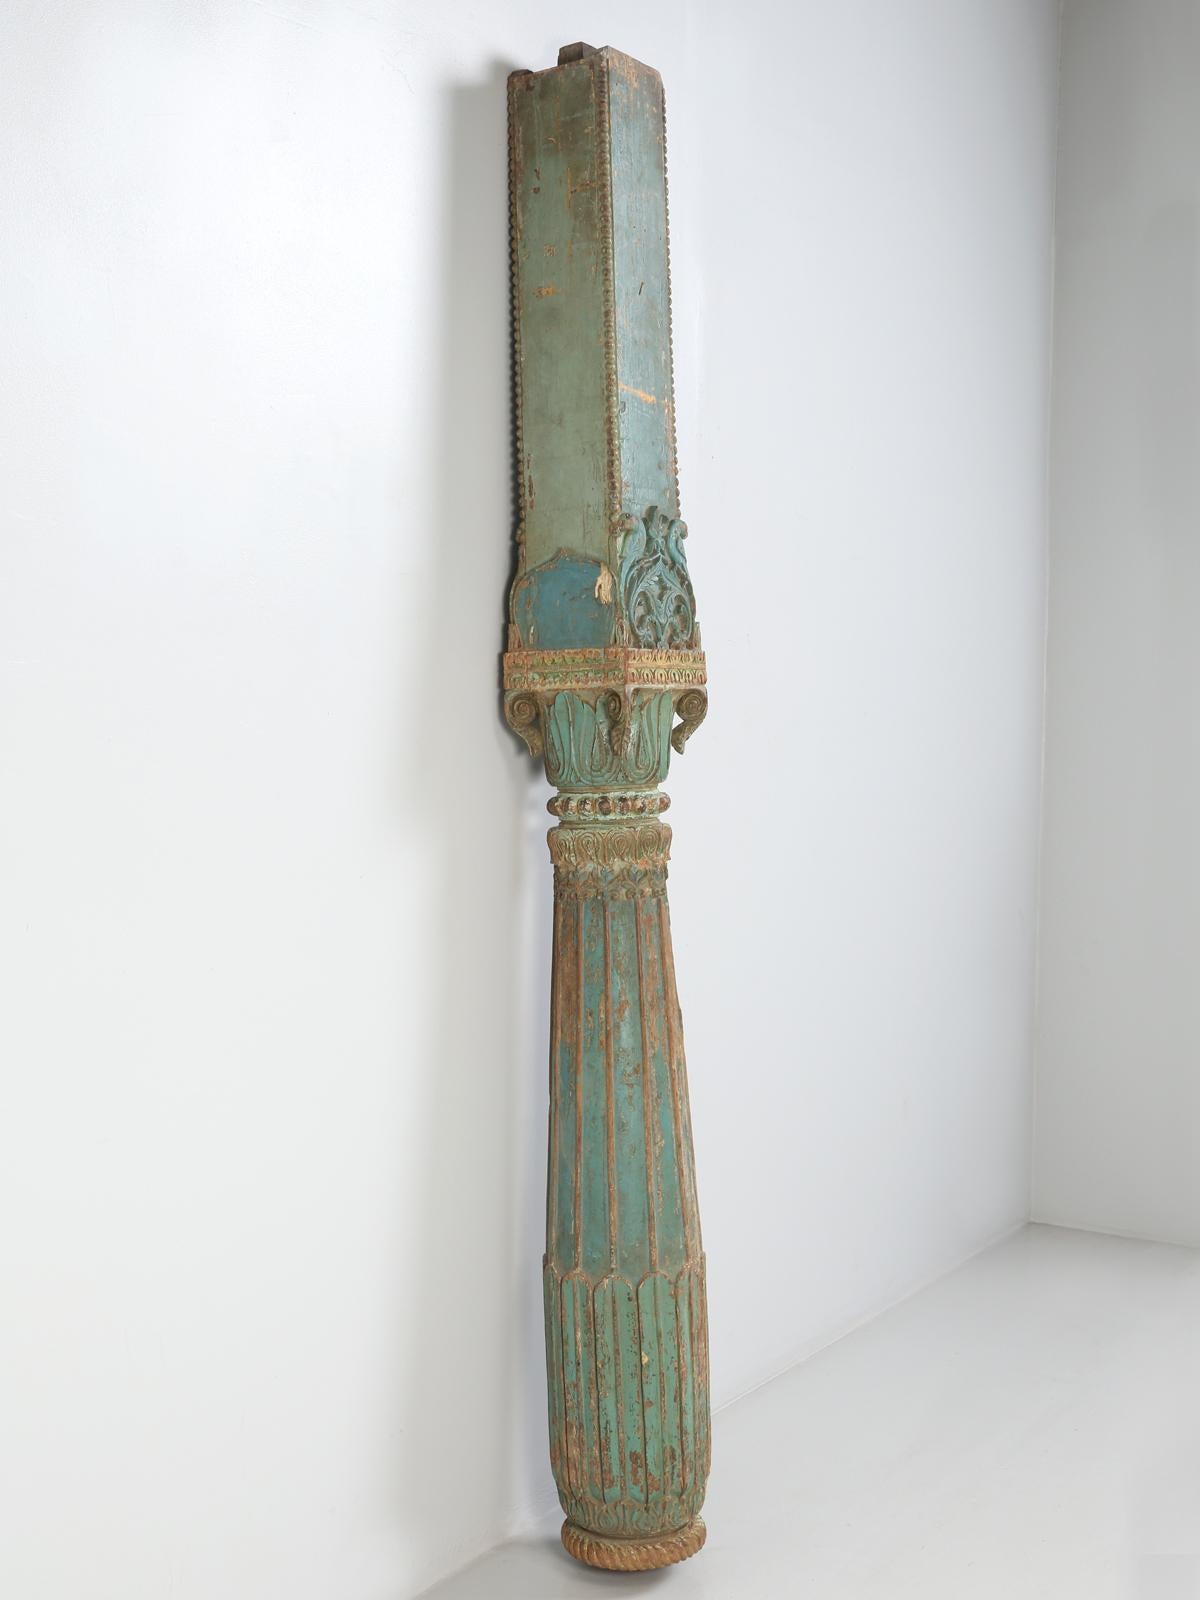 The column appear to have come from India and was hand carved from solid teak wood. The paint is older and we have not restored or enhanced any of the columns original paintwork.